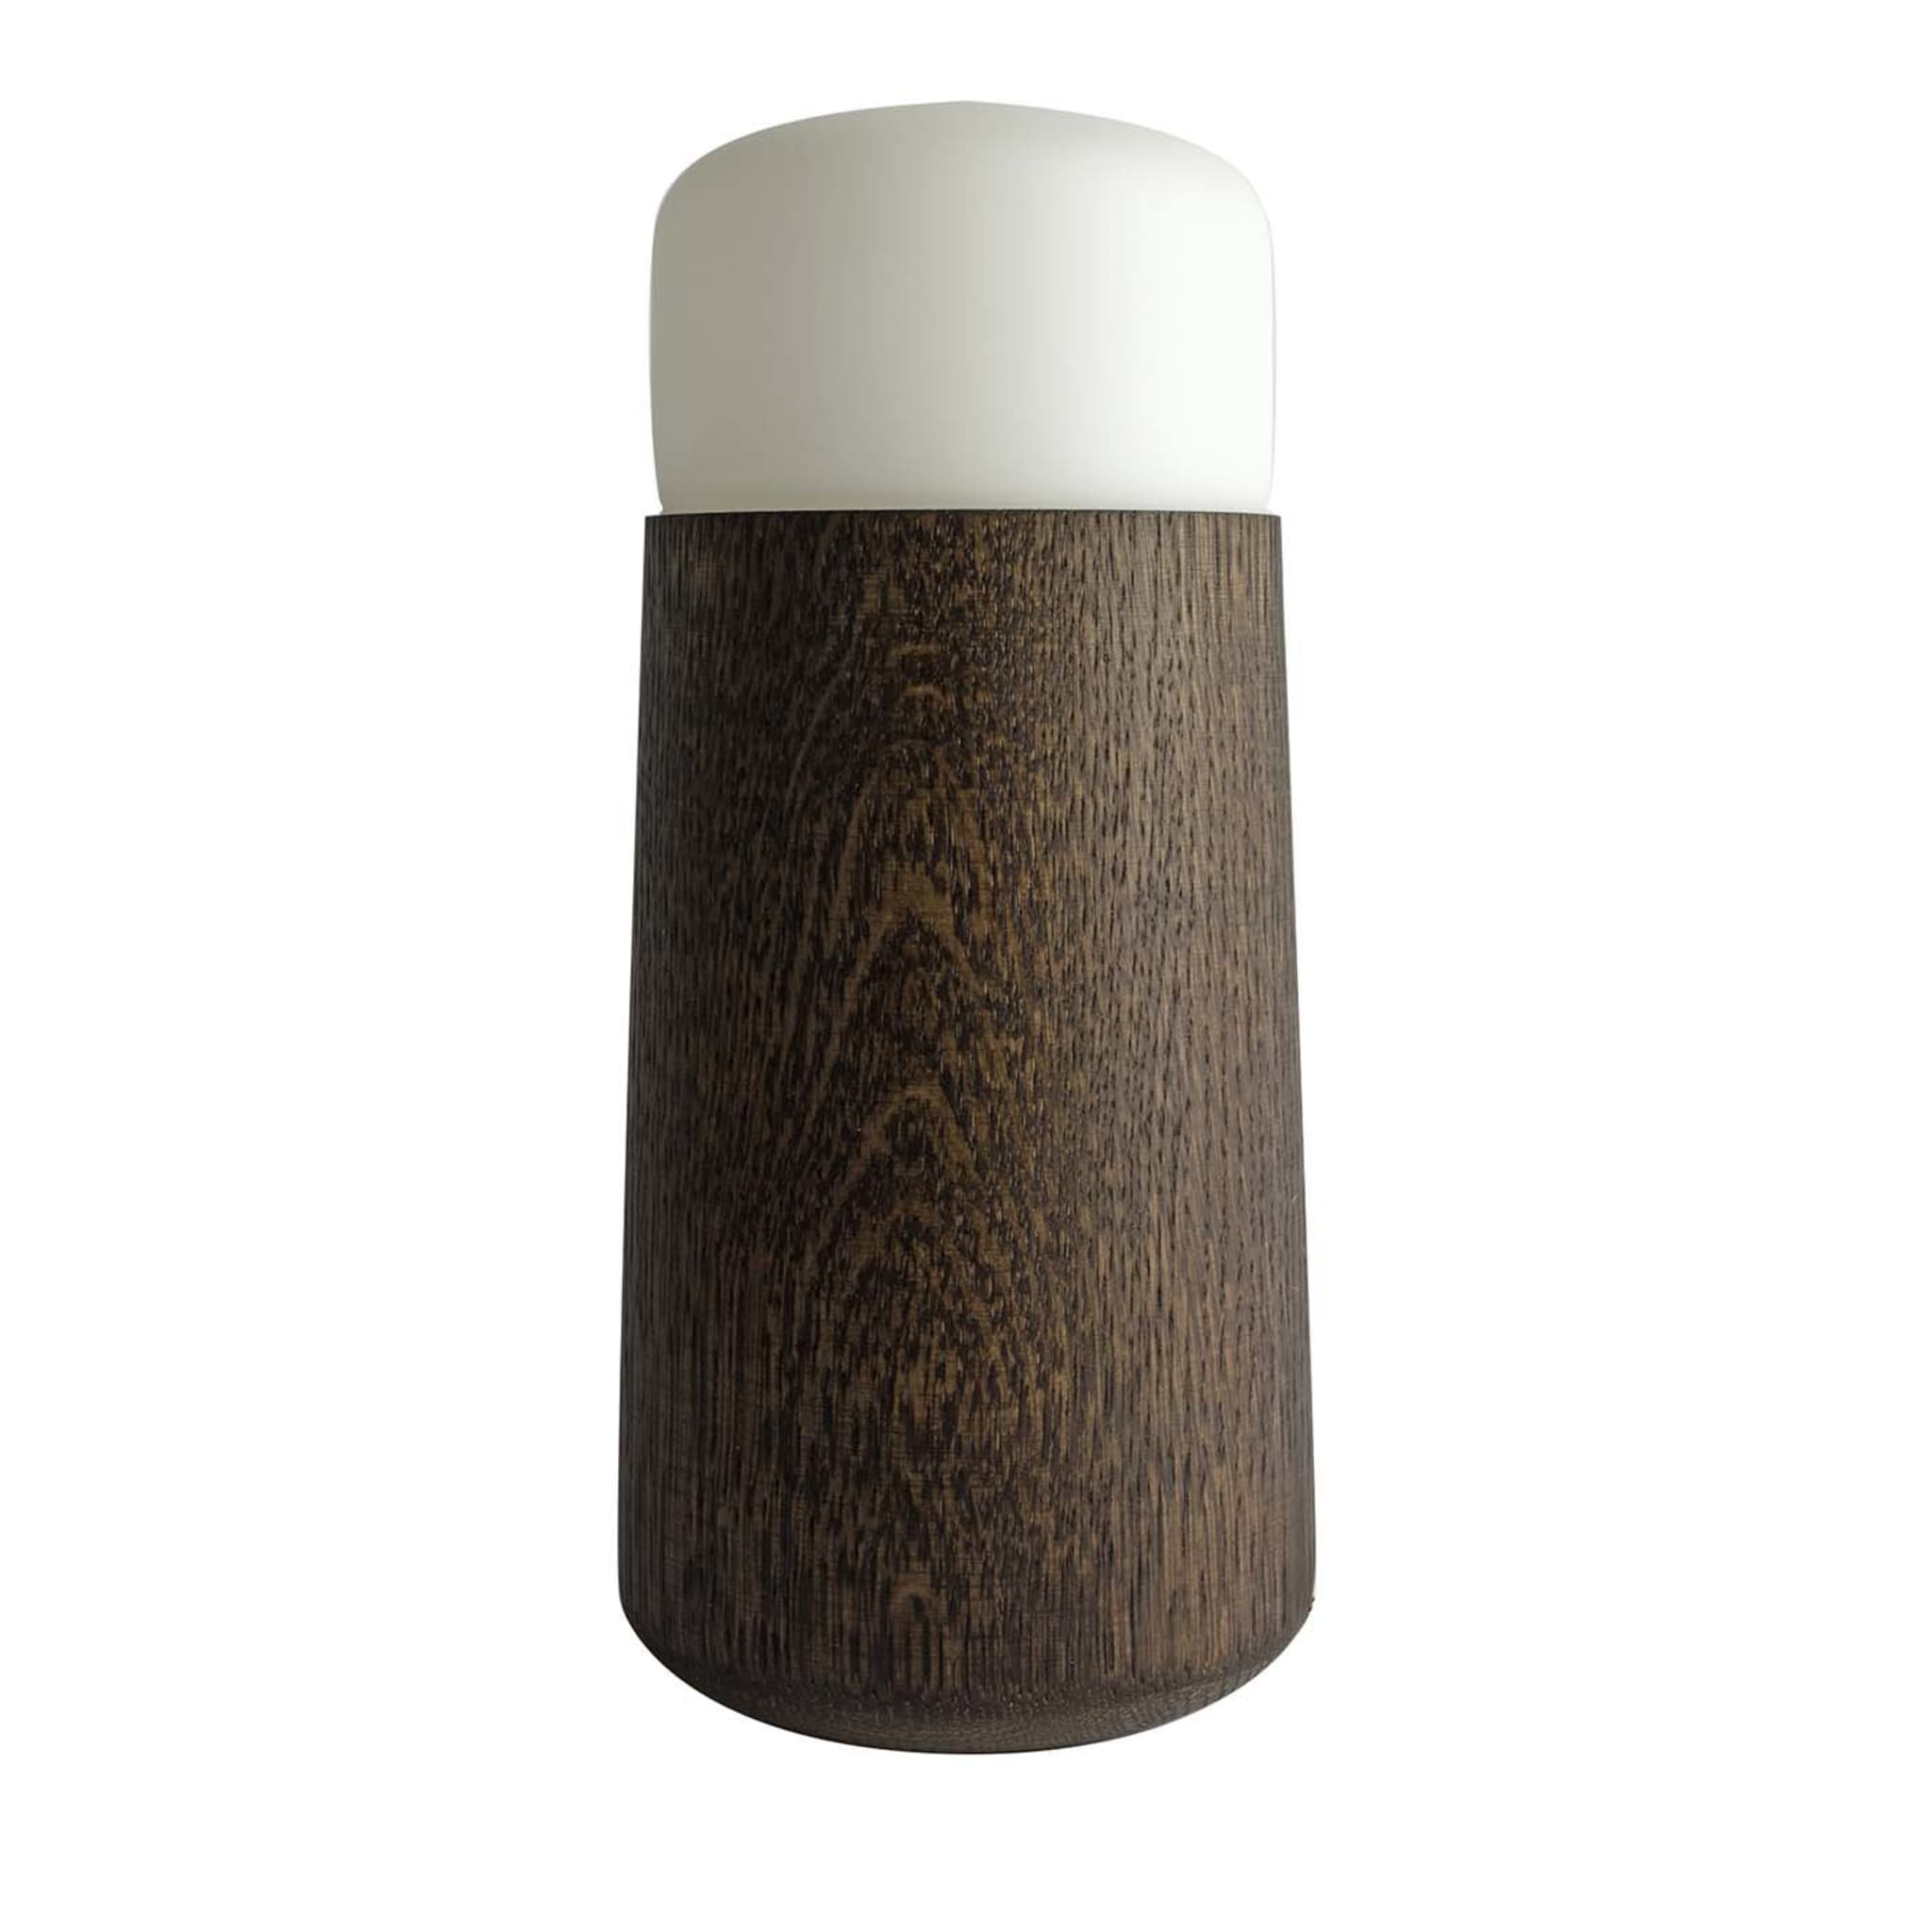 Silo Large Wood Table Lamp by Alalda Design - Main view